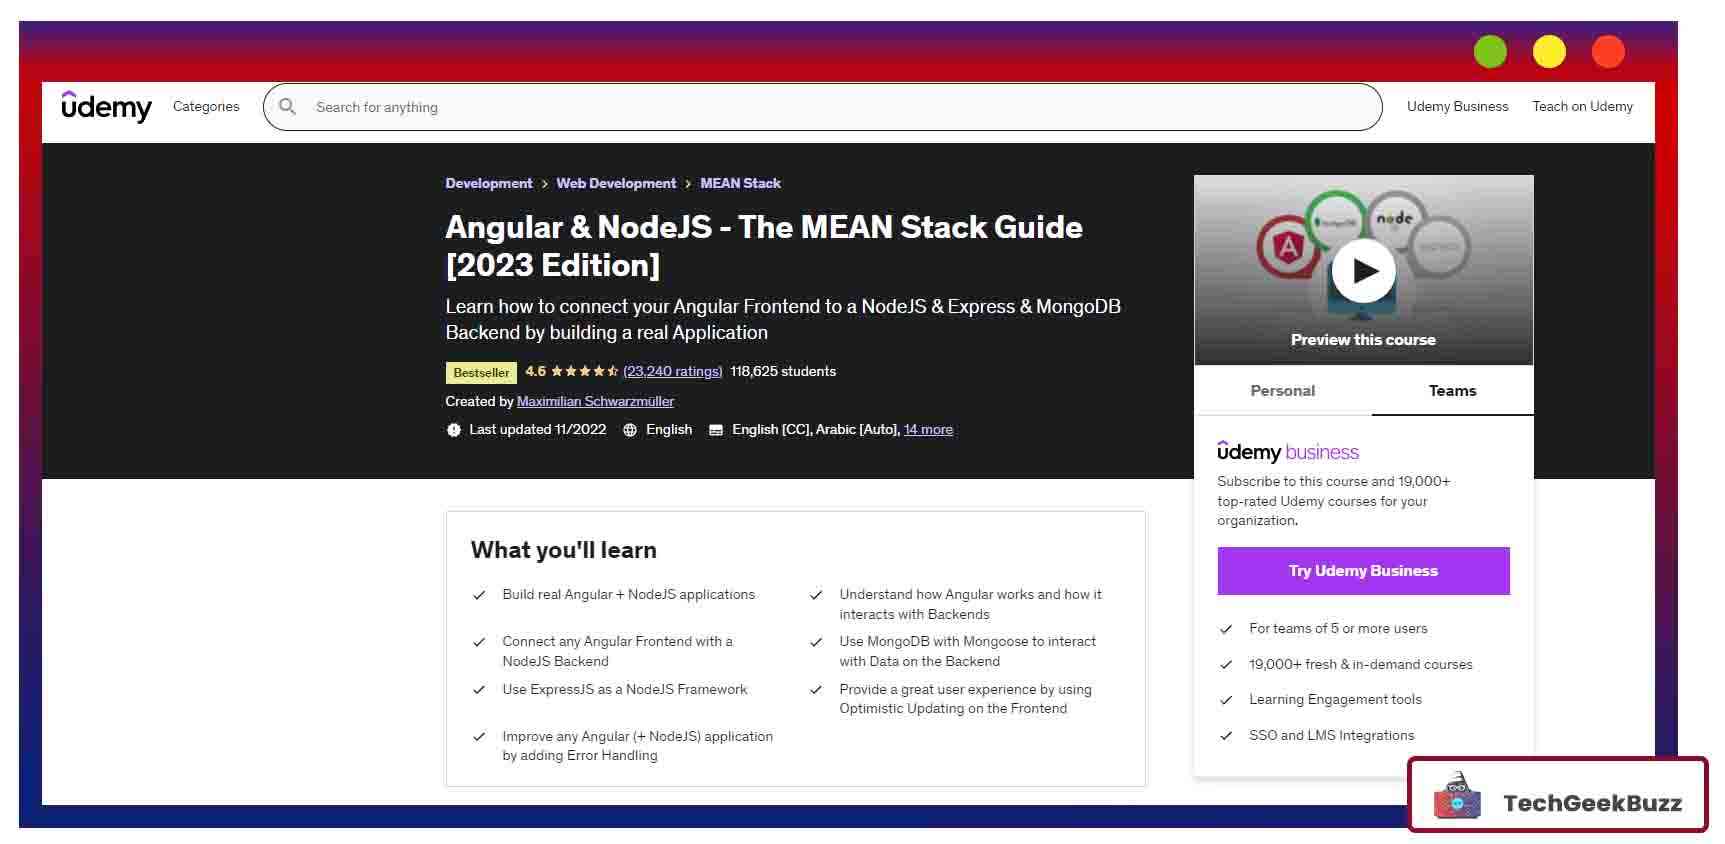 Angular & NodeJS - The MEAN Stack Guide